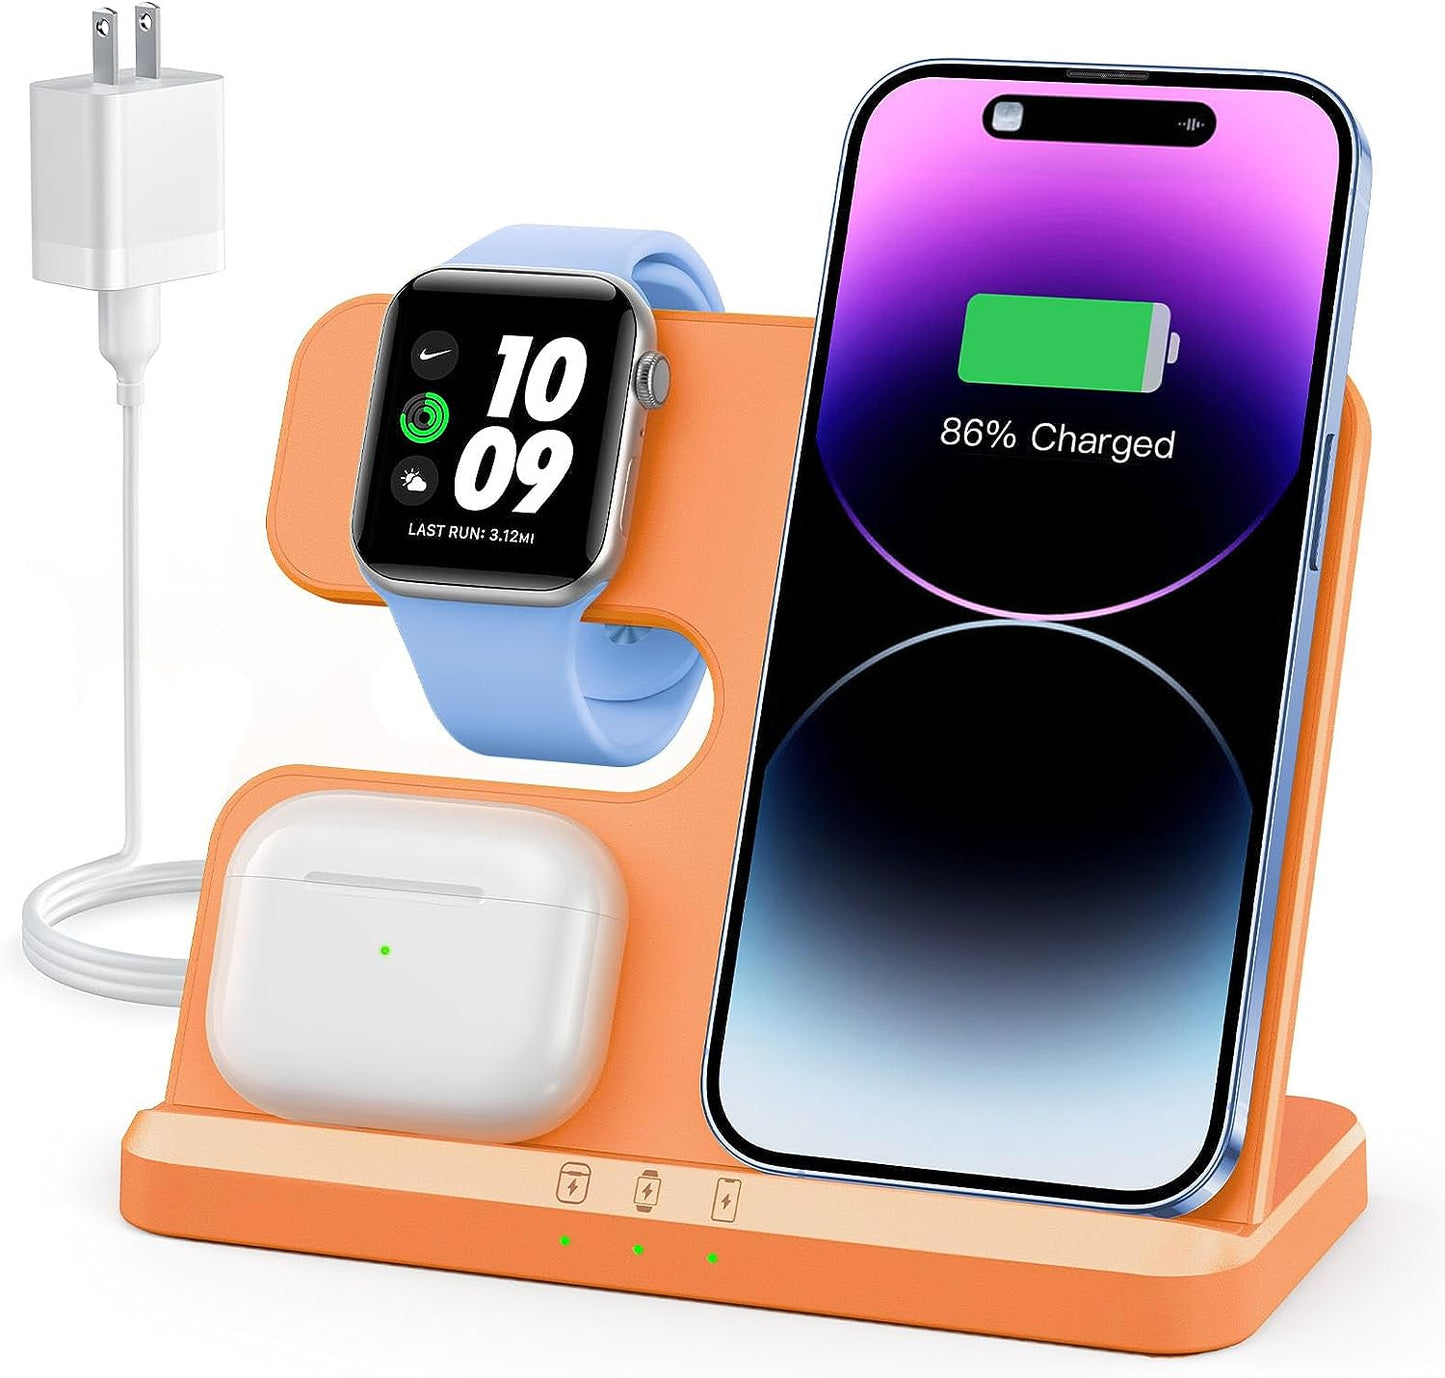 𝟮𝟬𝟮𝟯 𝗡𝗲𝘄 JARGOU 3 in 1 Wireless Charging Station Wireless Charger for iPhone 14 13 12 11 Pro Max/X/8 Charging Station for Multiple Devices for Apple Watch for AirPods 2/3/Pro/Pro 2  Orange